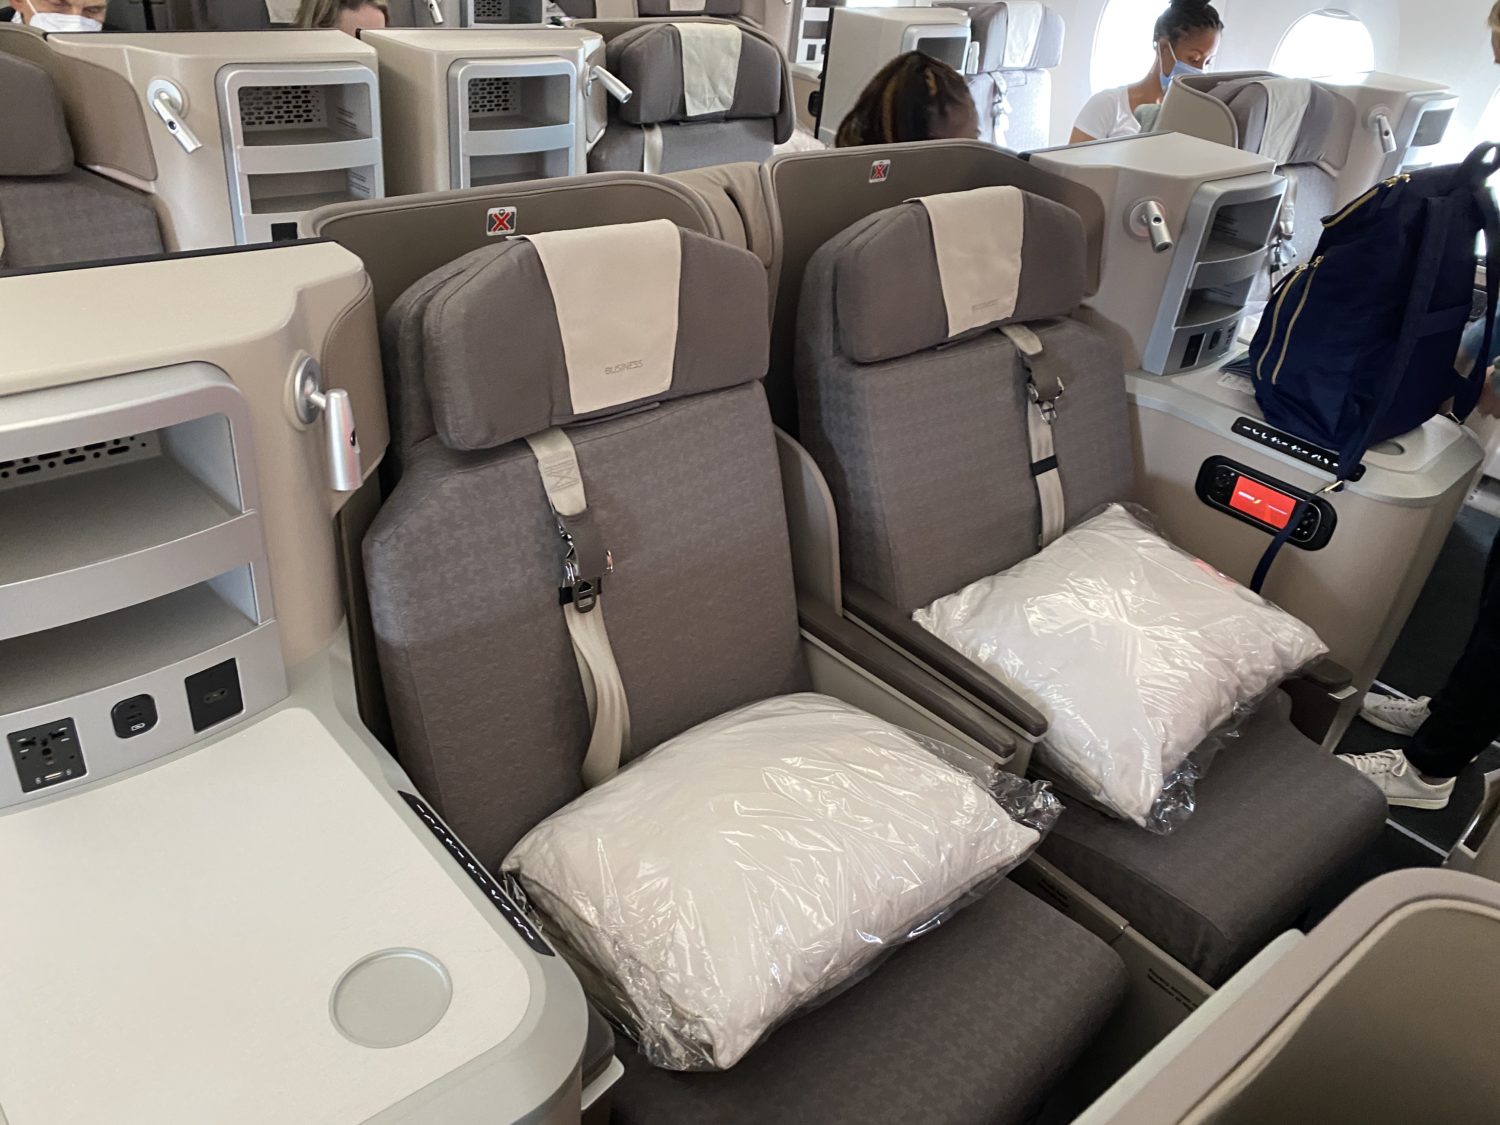 iberia business class seat  The Best Ways to Book Business Class Flights &#8211; Thrifty Traveler IMG 2845 scaled